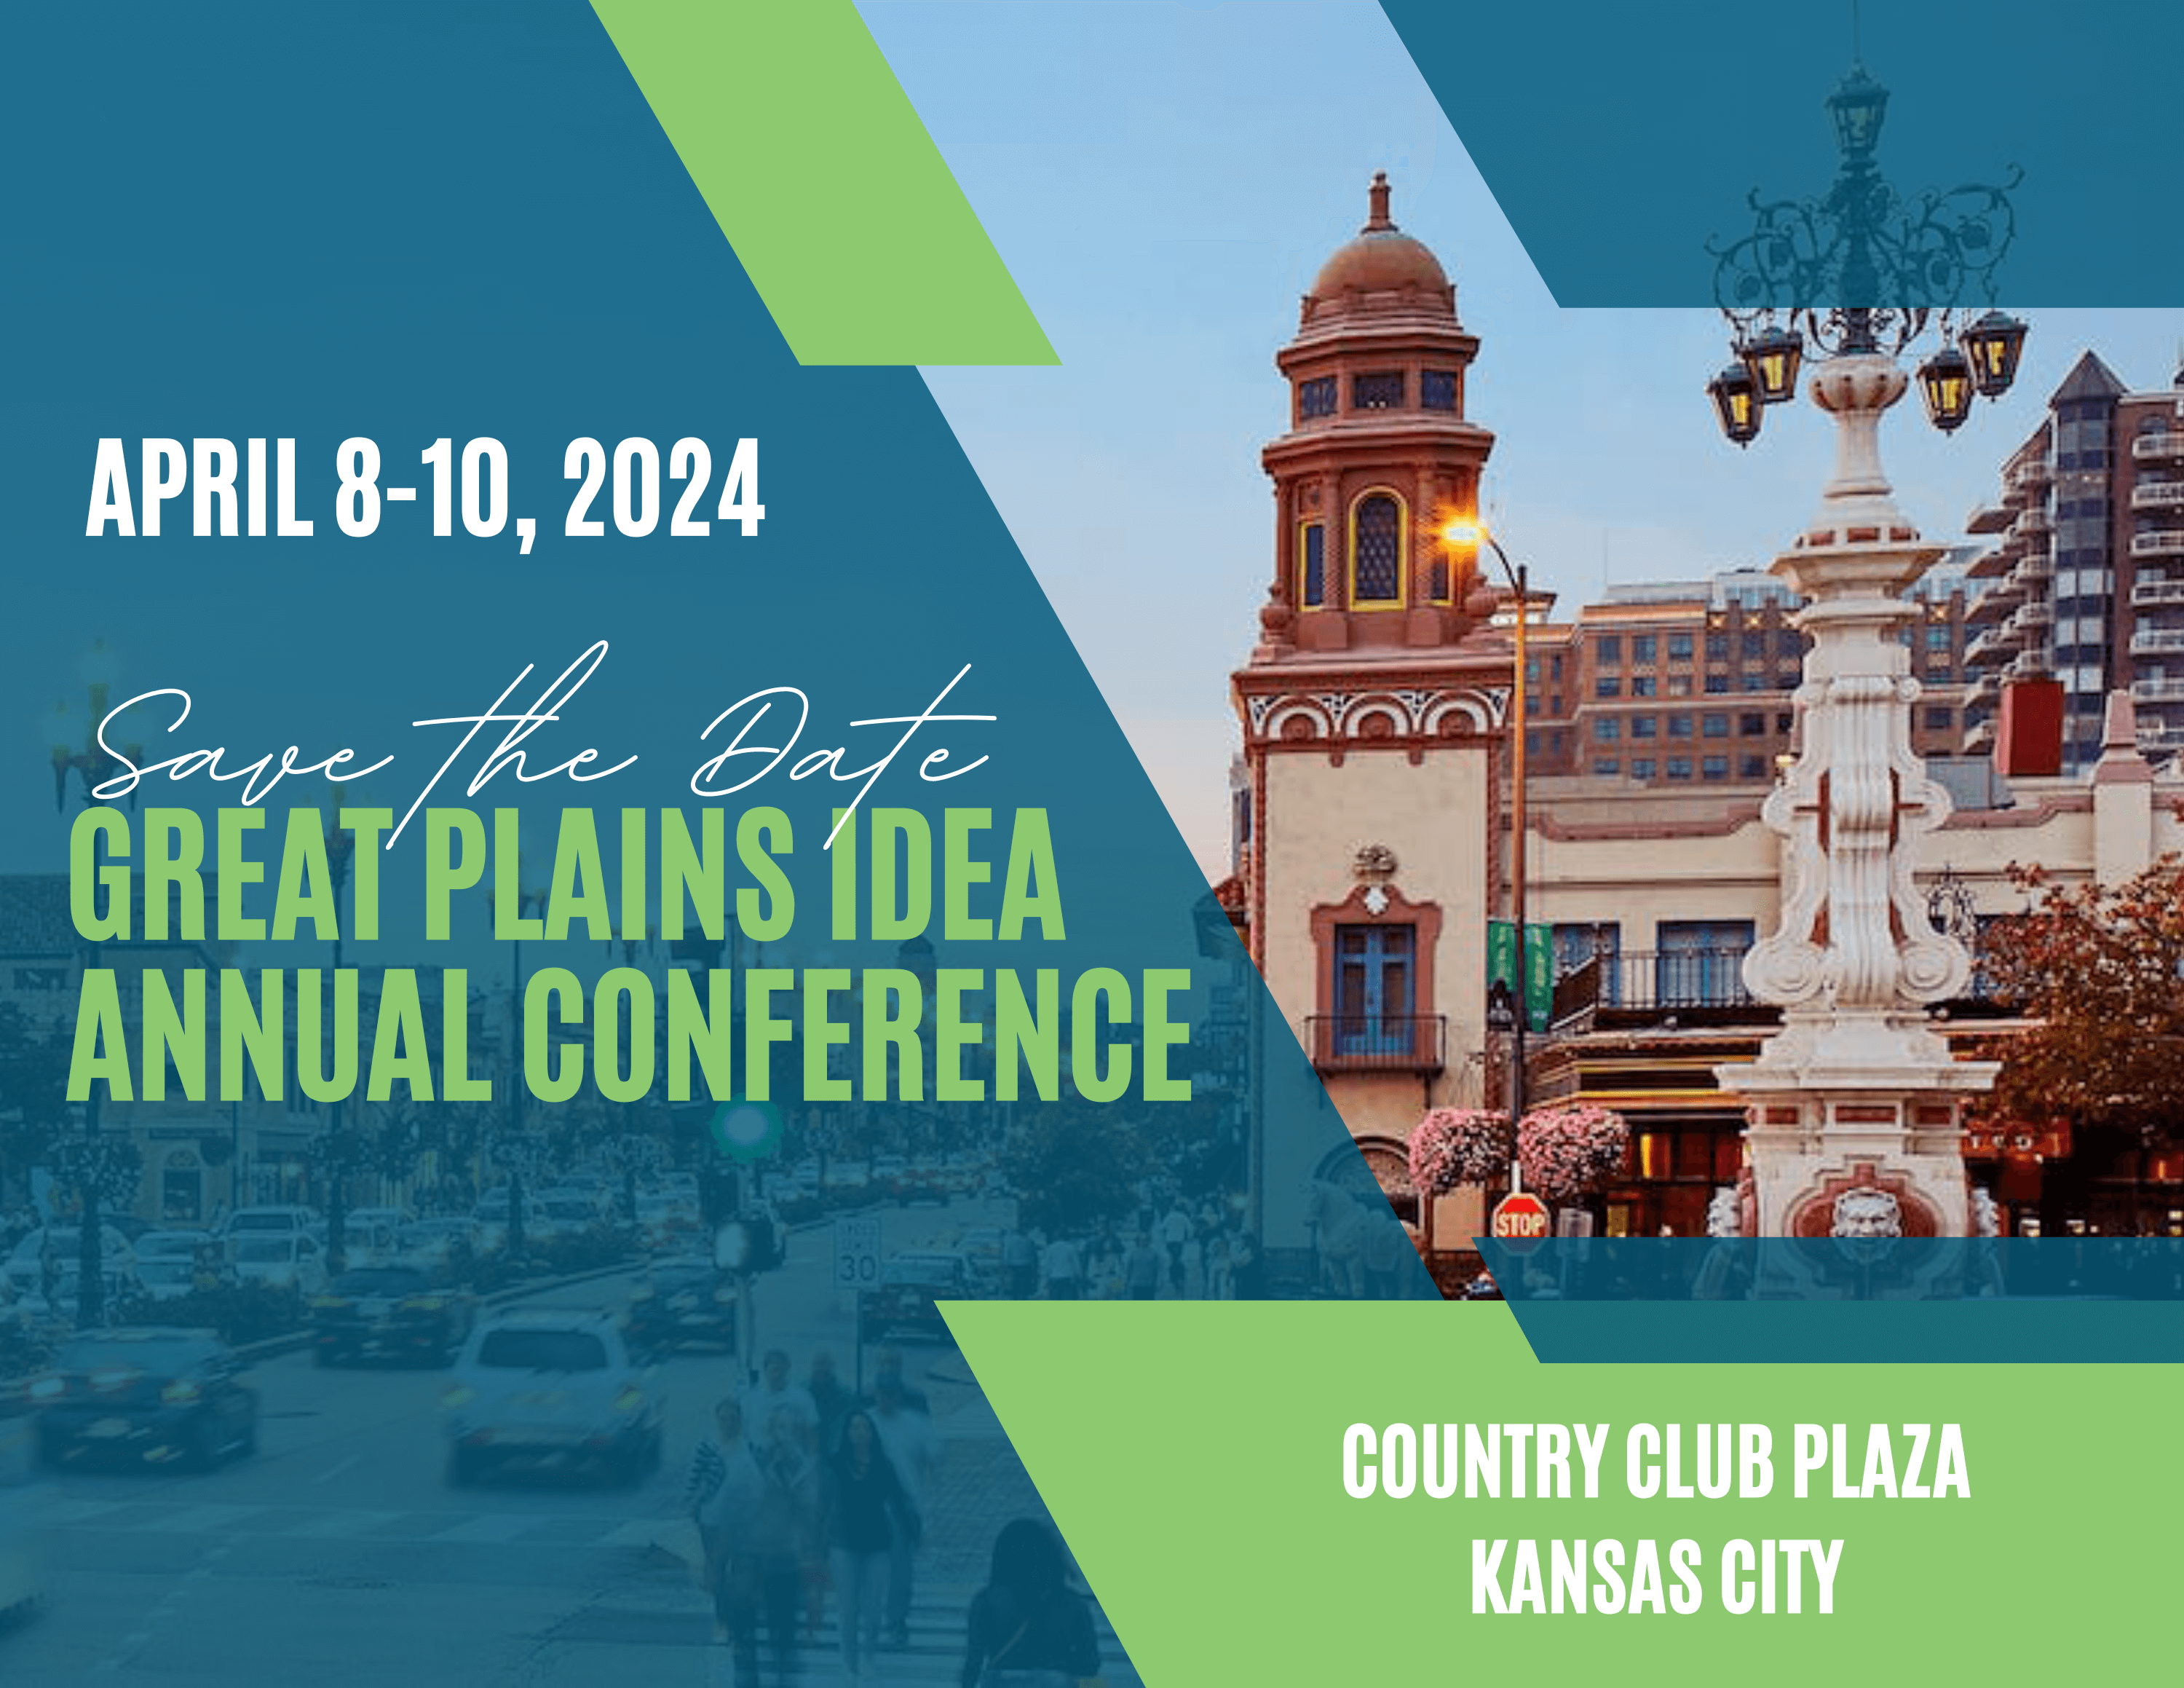 The 2024 conference will be in Kansas City April 8-10.